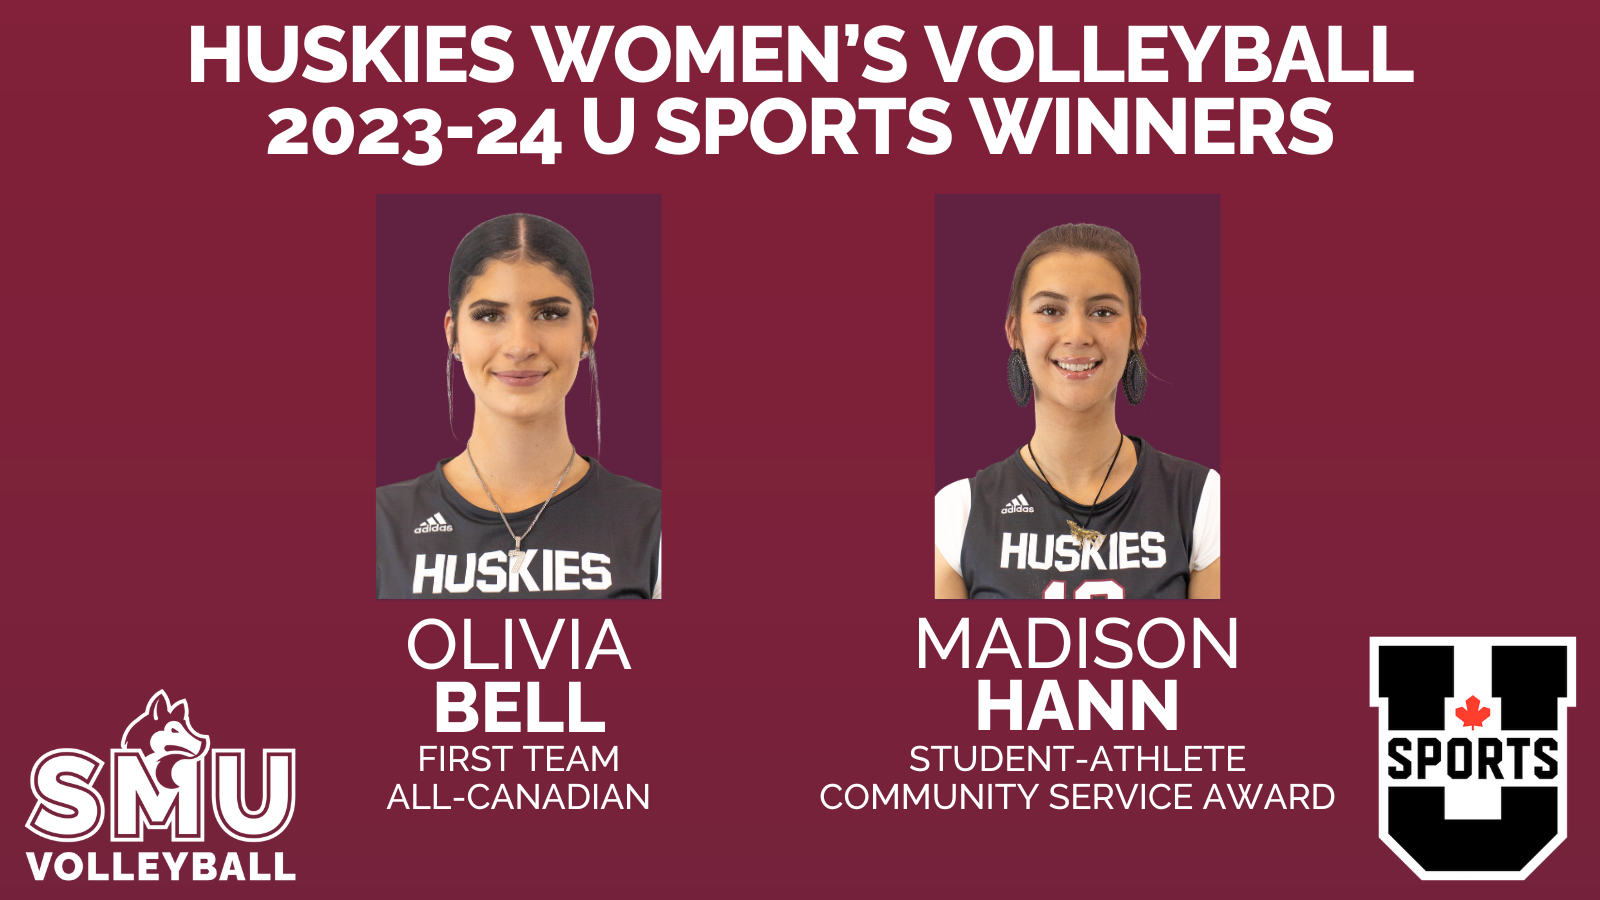 Madison Hann honoured with U SPORTS Student-Athlete Community Service Award, Olivia Bell named First Team All-Canadian